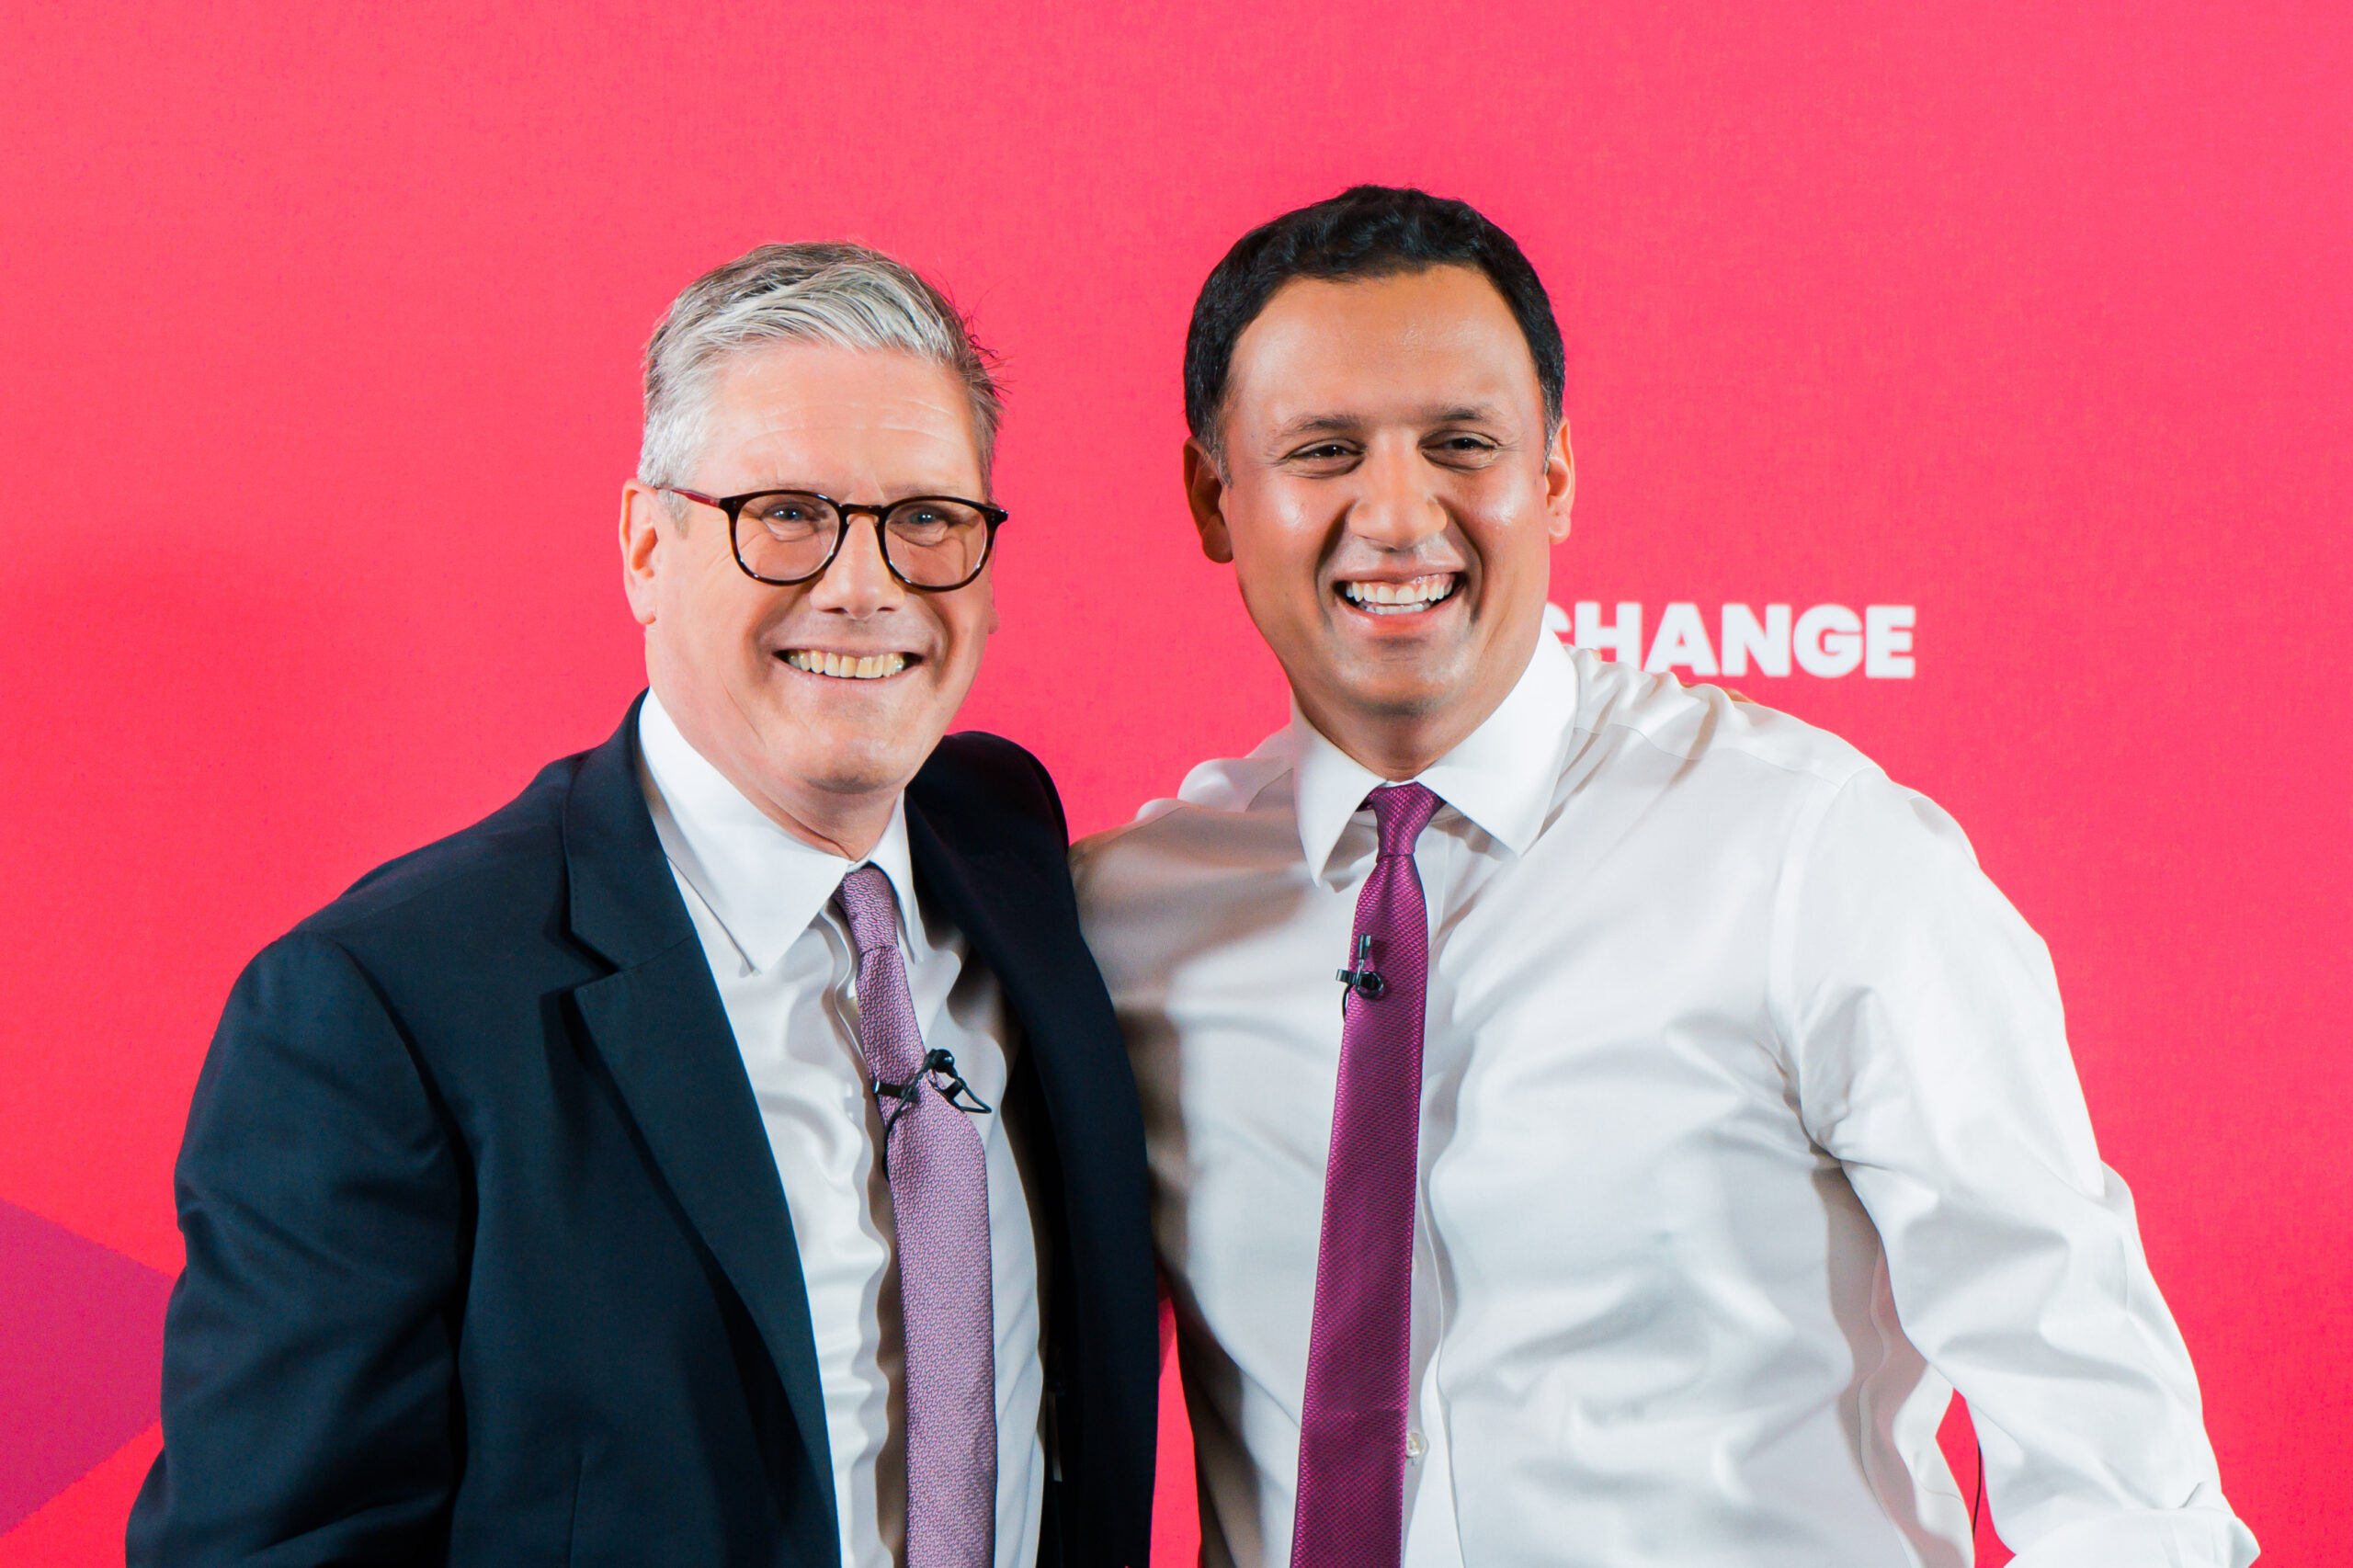 Keir Starmer and Anas Sarwar standing side by side in front of change backdrop